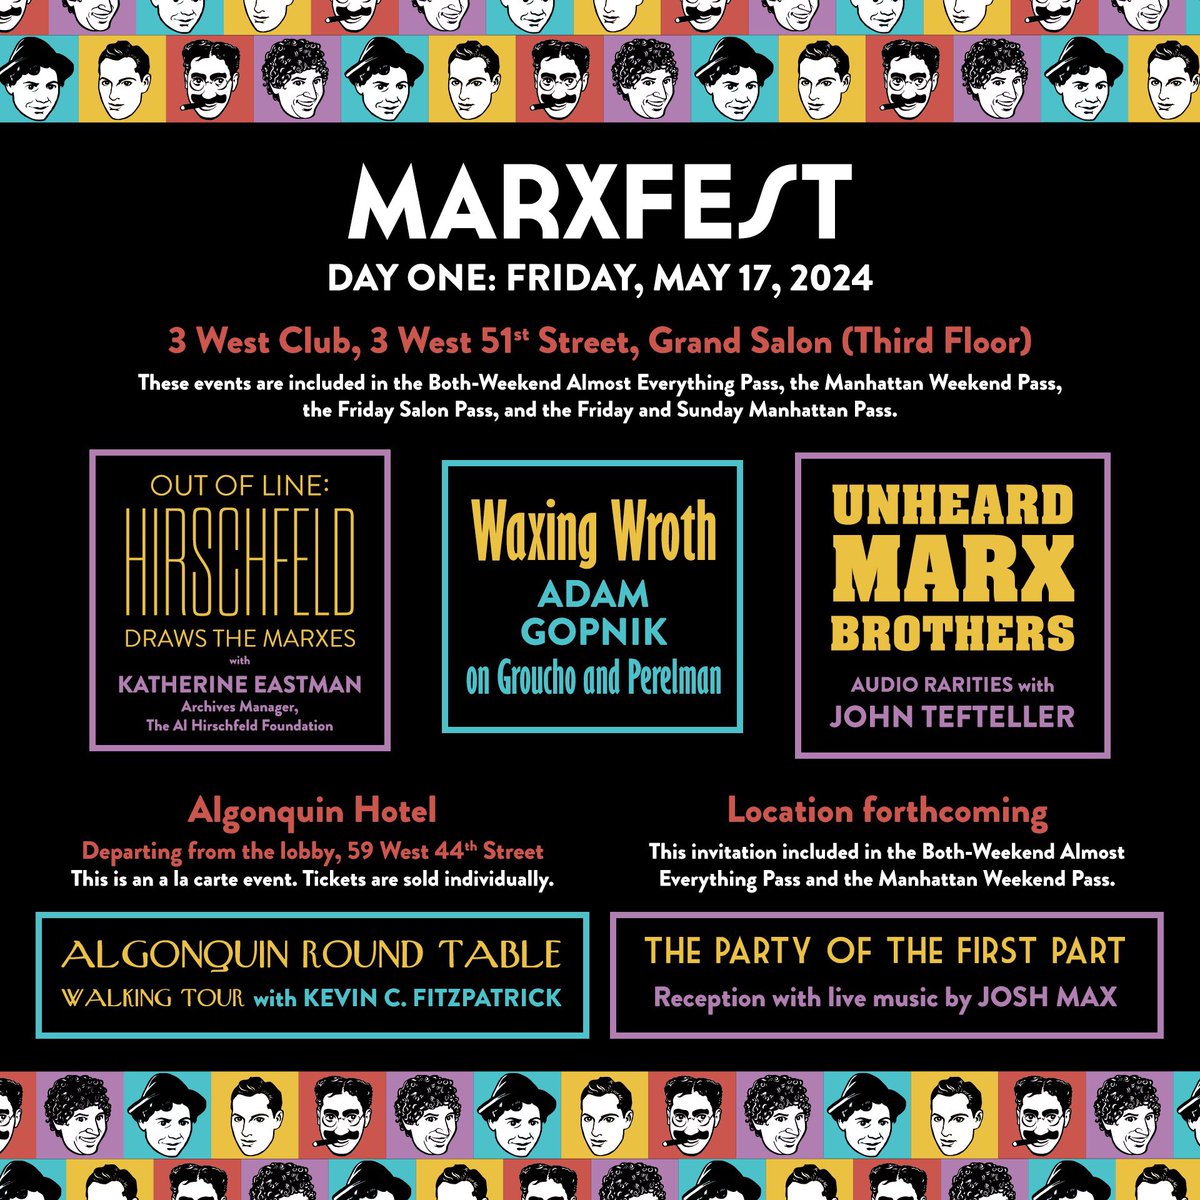 Marx Brothers Festival is returning for 2 weekends in May! @marxfest @AlHirschfeld Tickets on sale soon marxfest.org